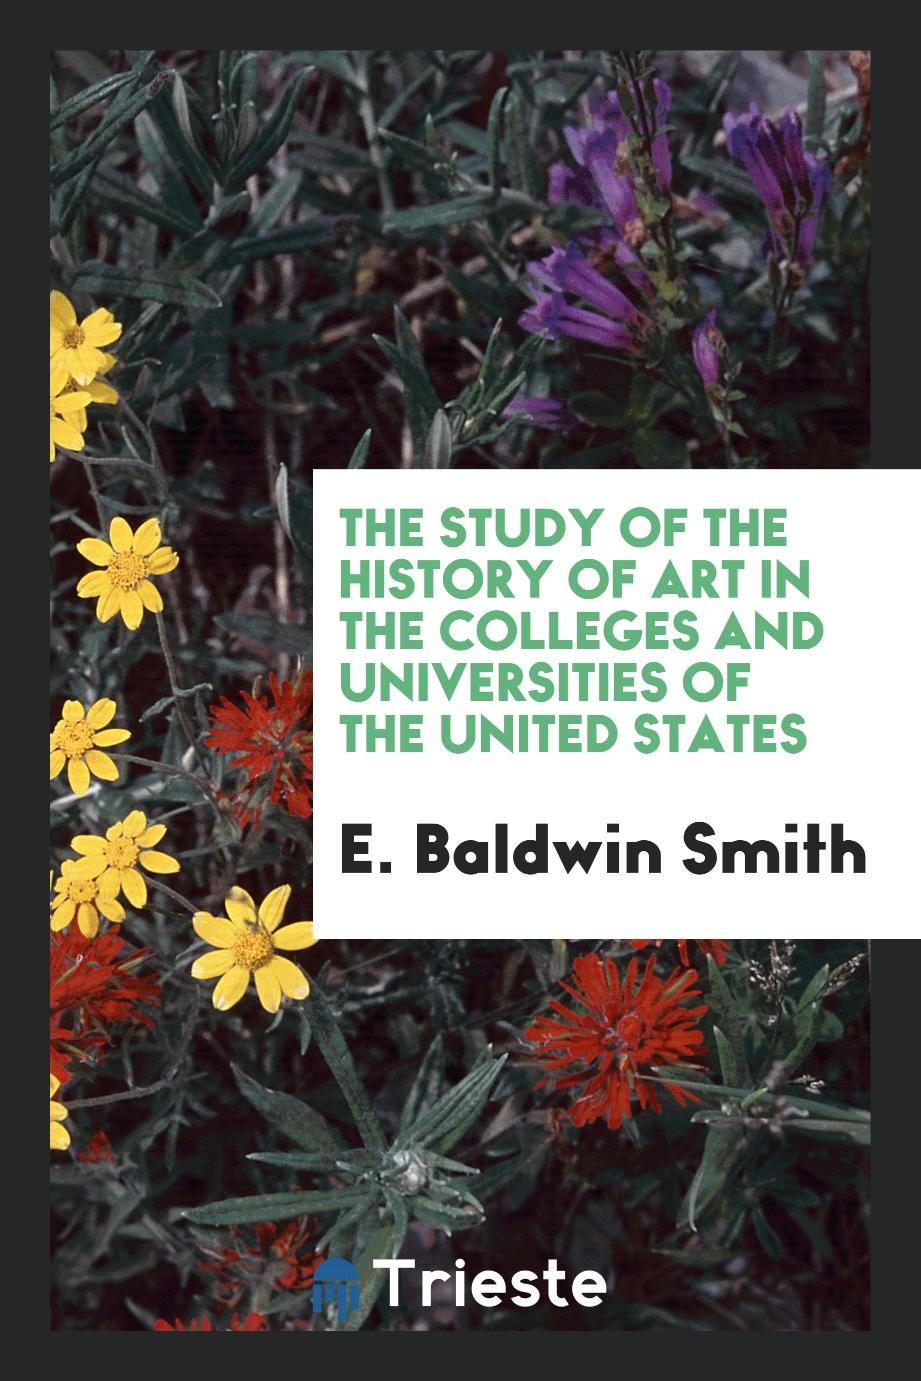 The Study of the History of Art in the Colleges and Universities of the United States